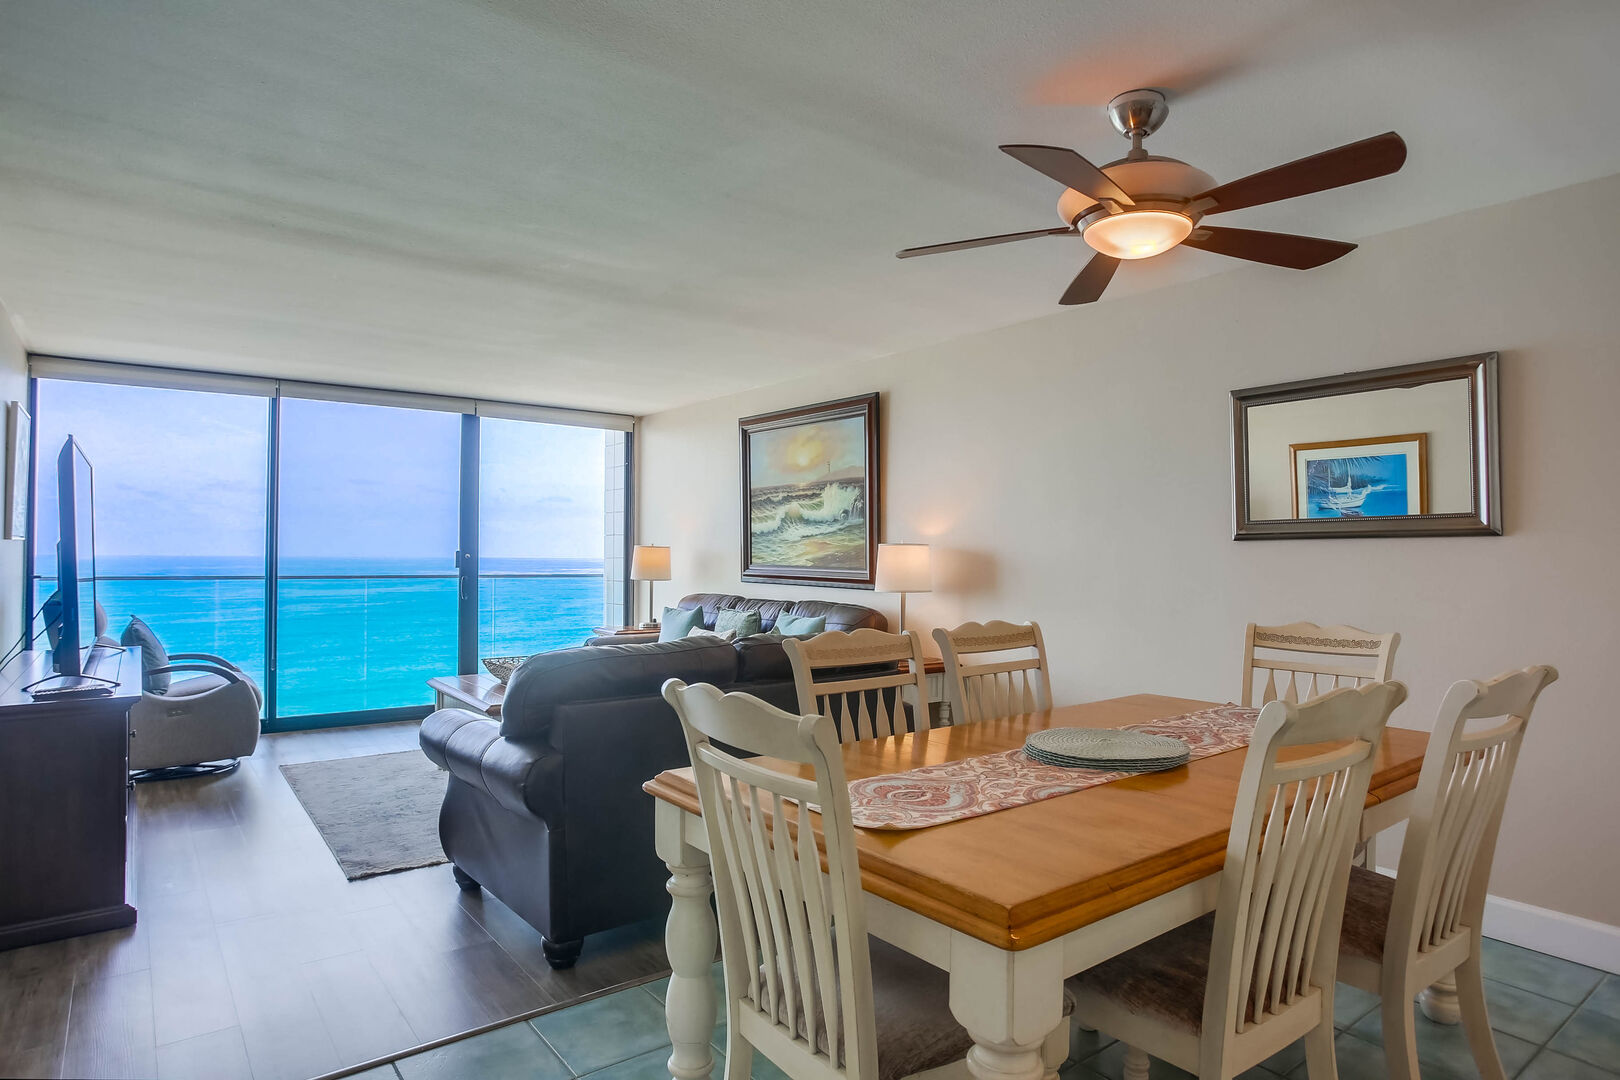 Open style floor plan with living room, dining seating for 6, ceiling fan, and an ocean view